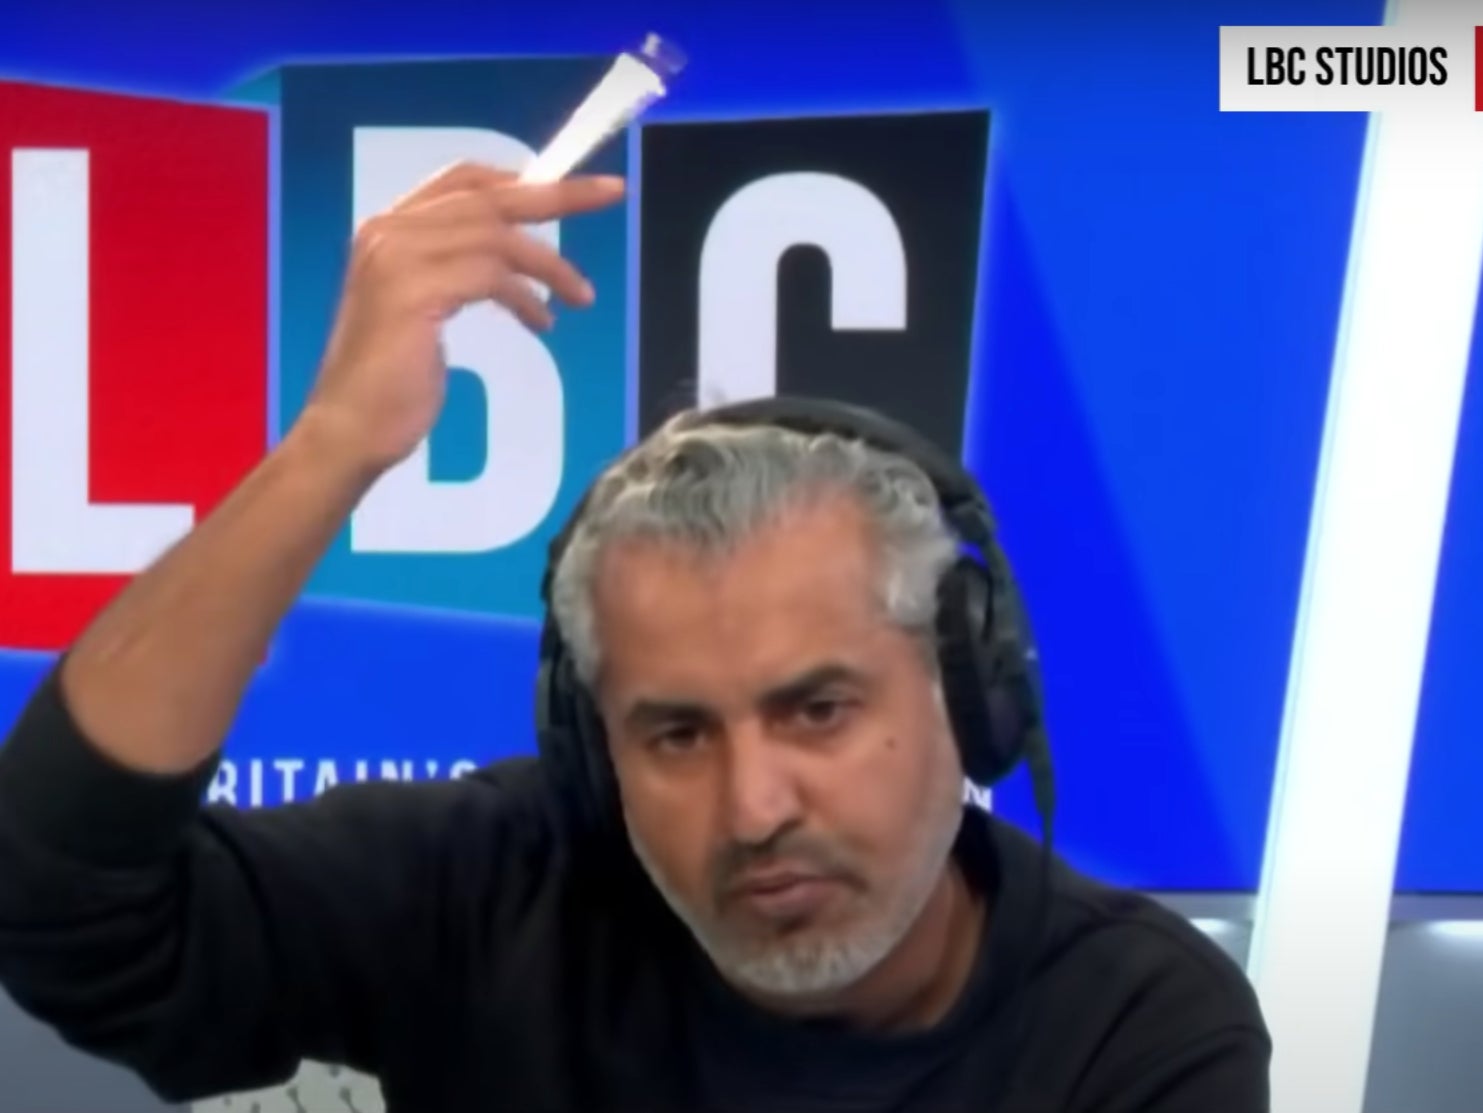 Maajid Nawaz will no longer present his LBC show ‘with immediate effect’, the station has said